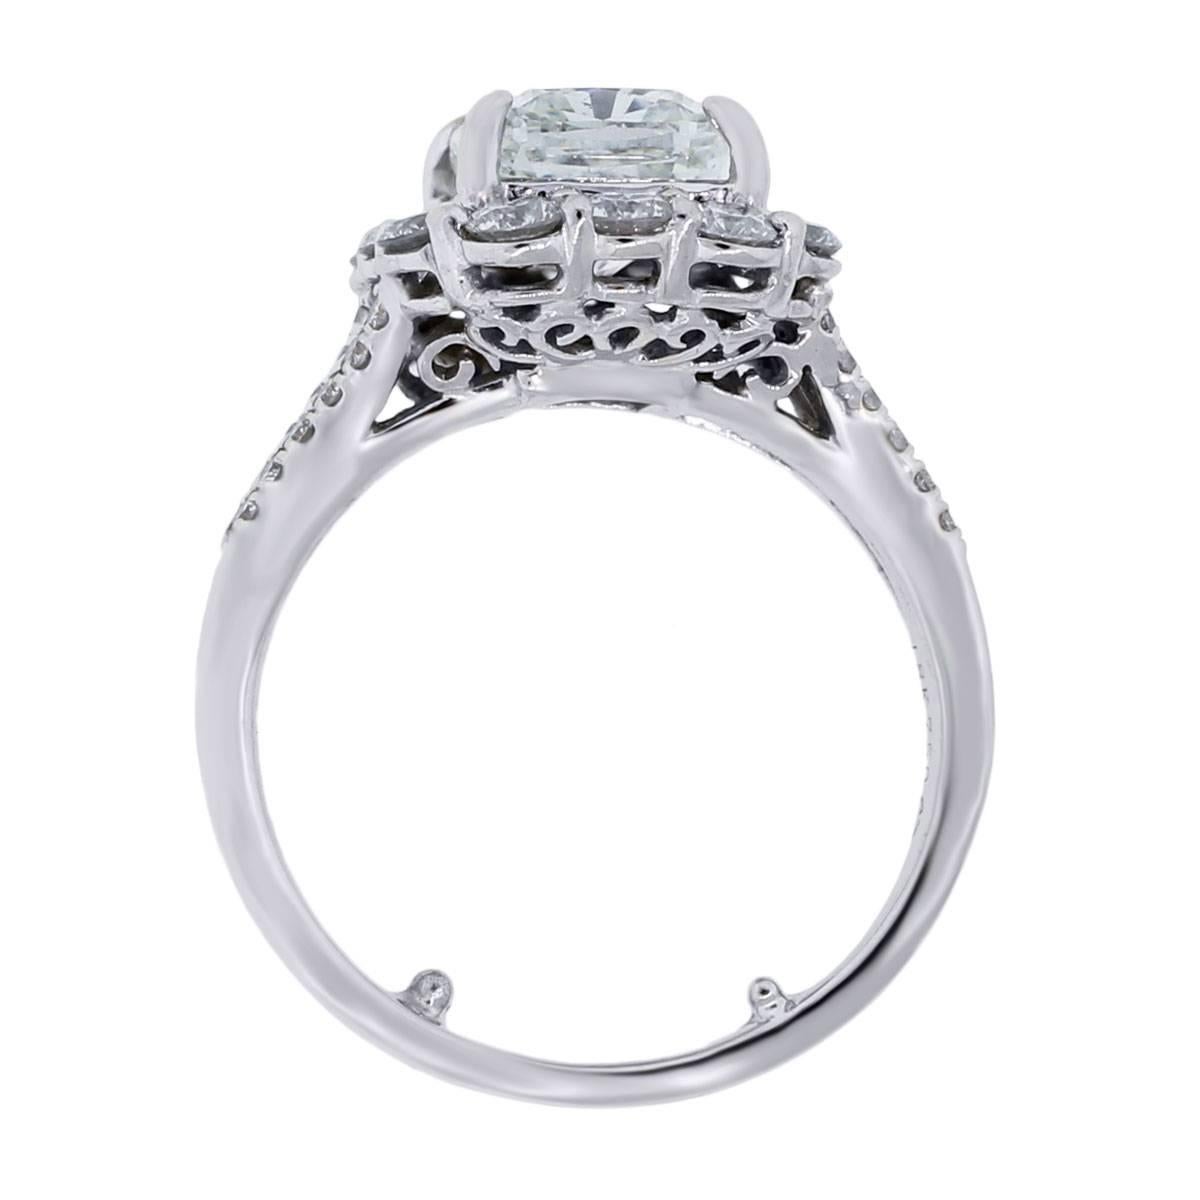 Style: 18k White Gold 1.61ct EGL Certified Cushion Cut Diamond Halo Engagement Ring
Material: 18k White Gold
Center Diamond Details: EGL certified Cushion Cut Diamond. Diamond is G in color and VS1 in clarity
Mounting Diamond Details: